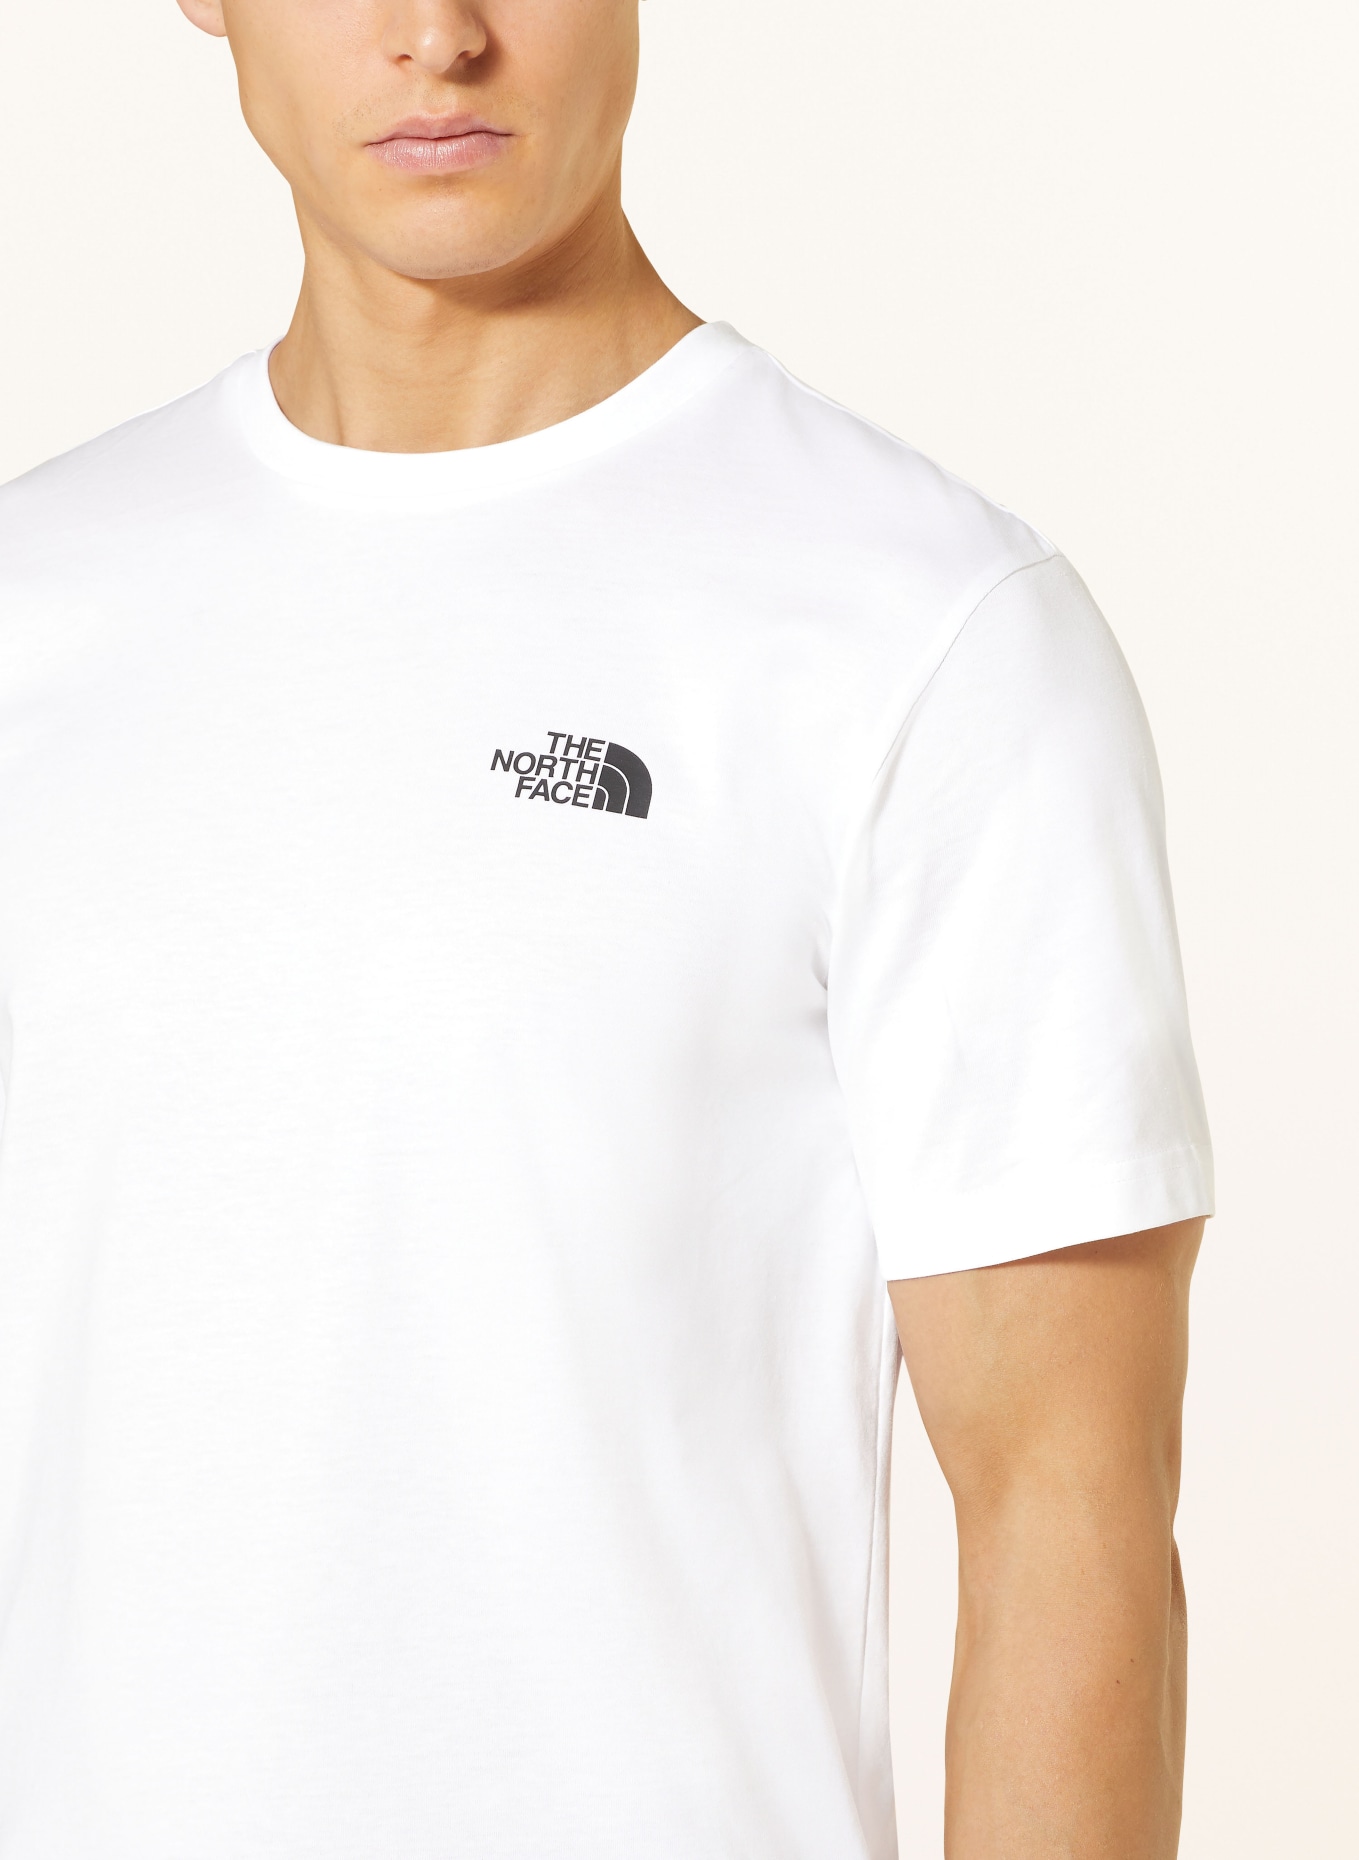 THE NORTH FACE T-Shirt, Farbe: WEISS (Bild 4)